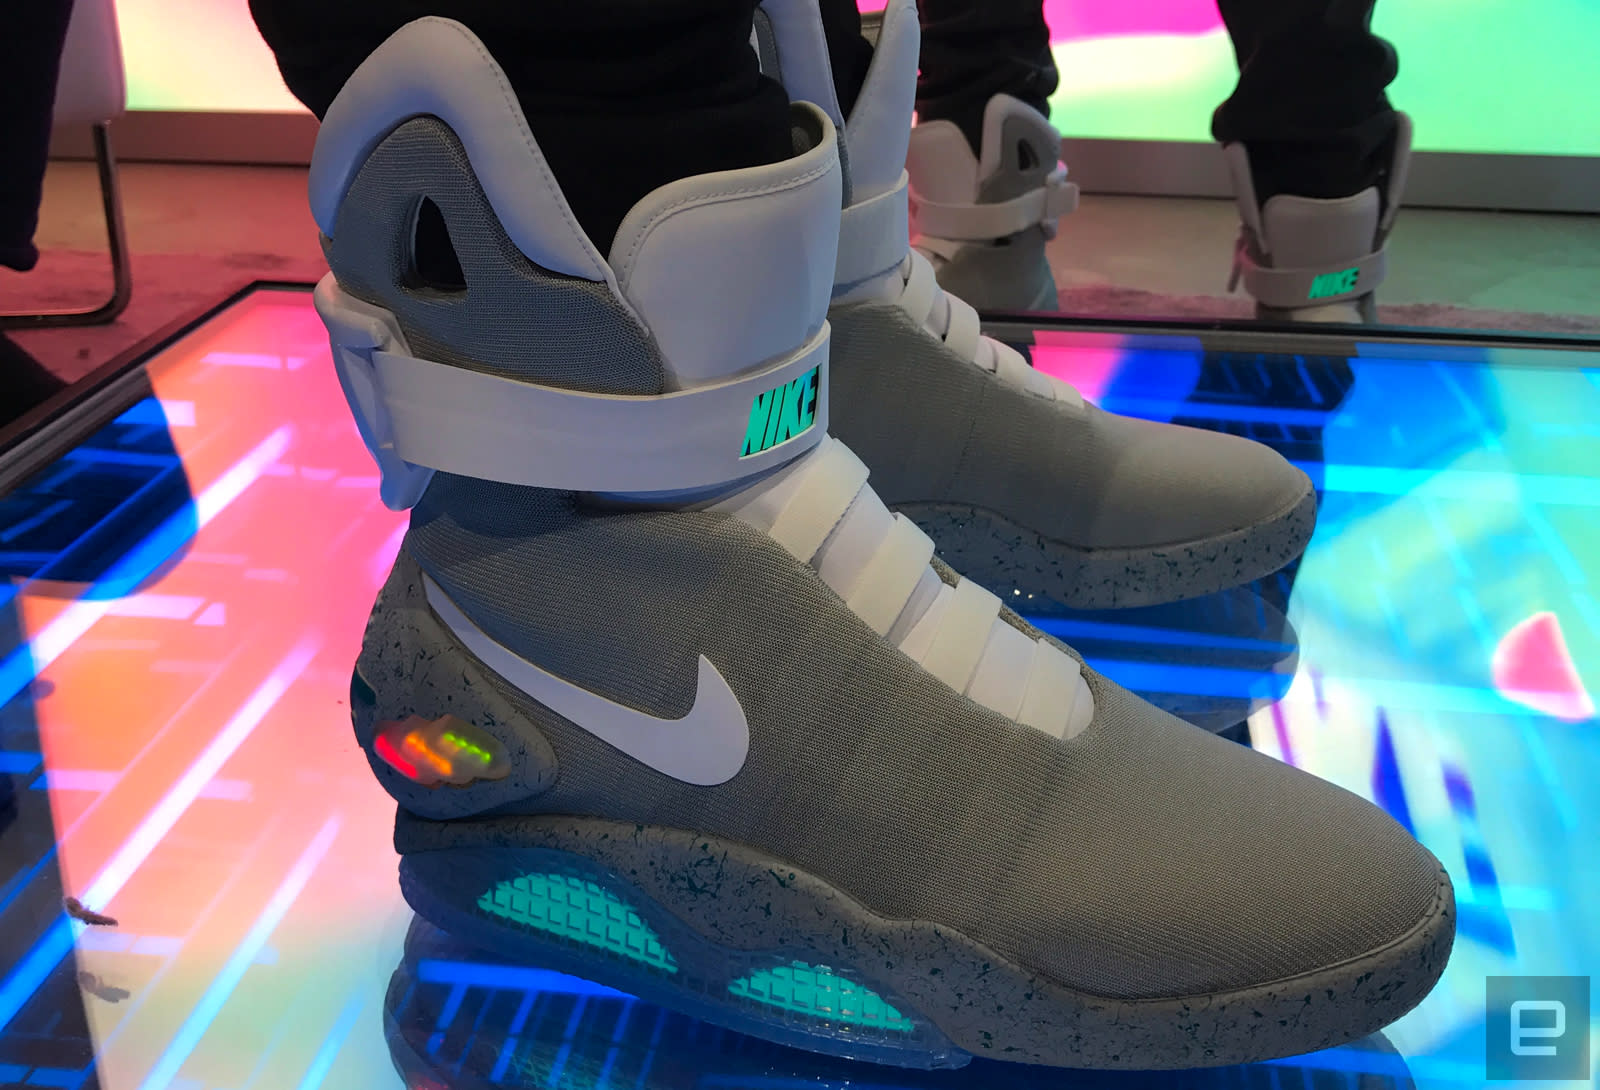 Nike's self-lacing Mags are hot, won't 